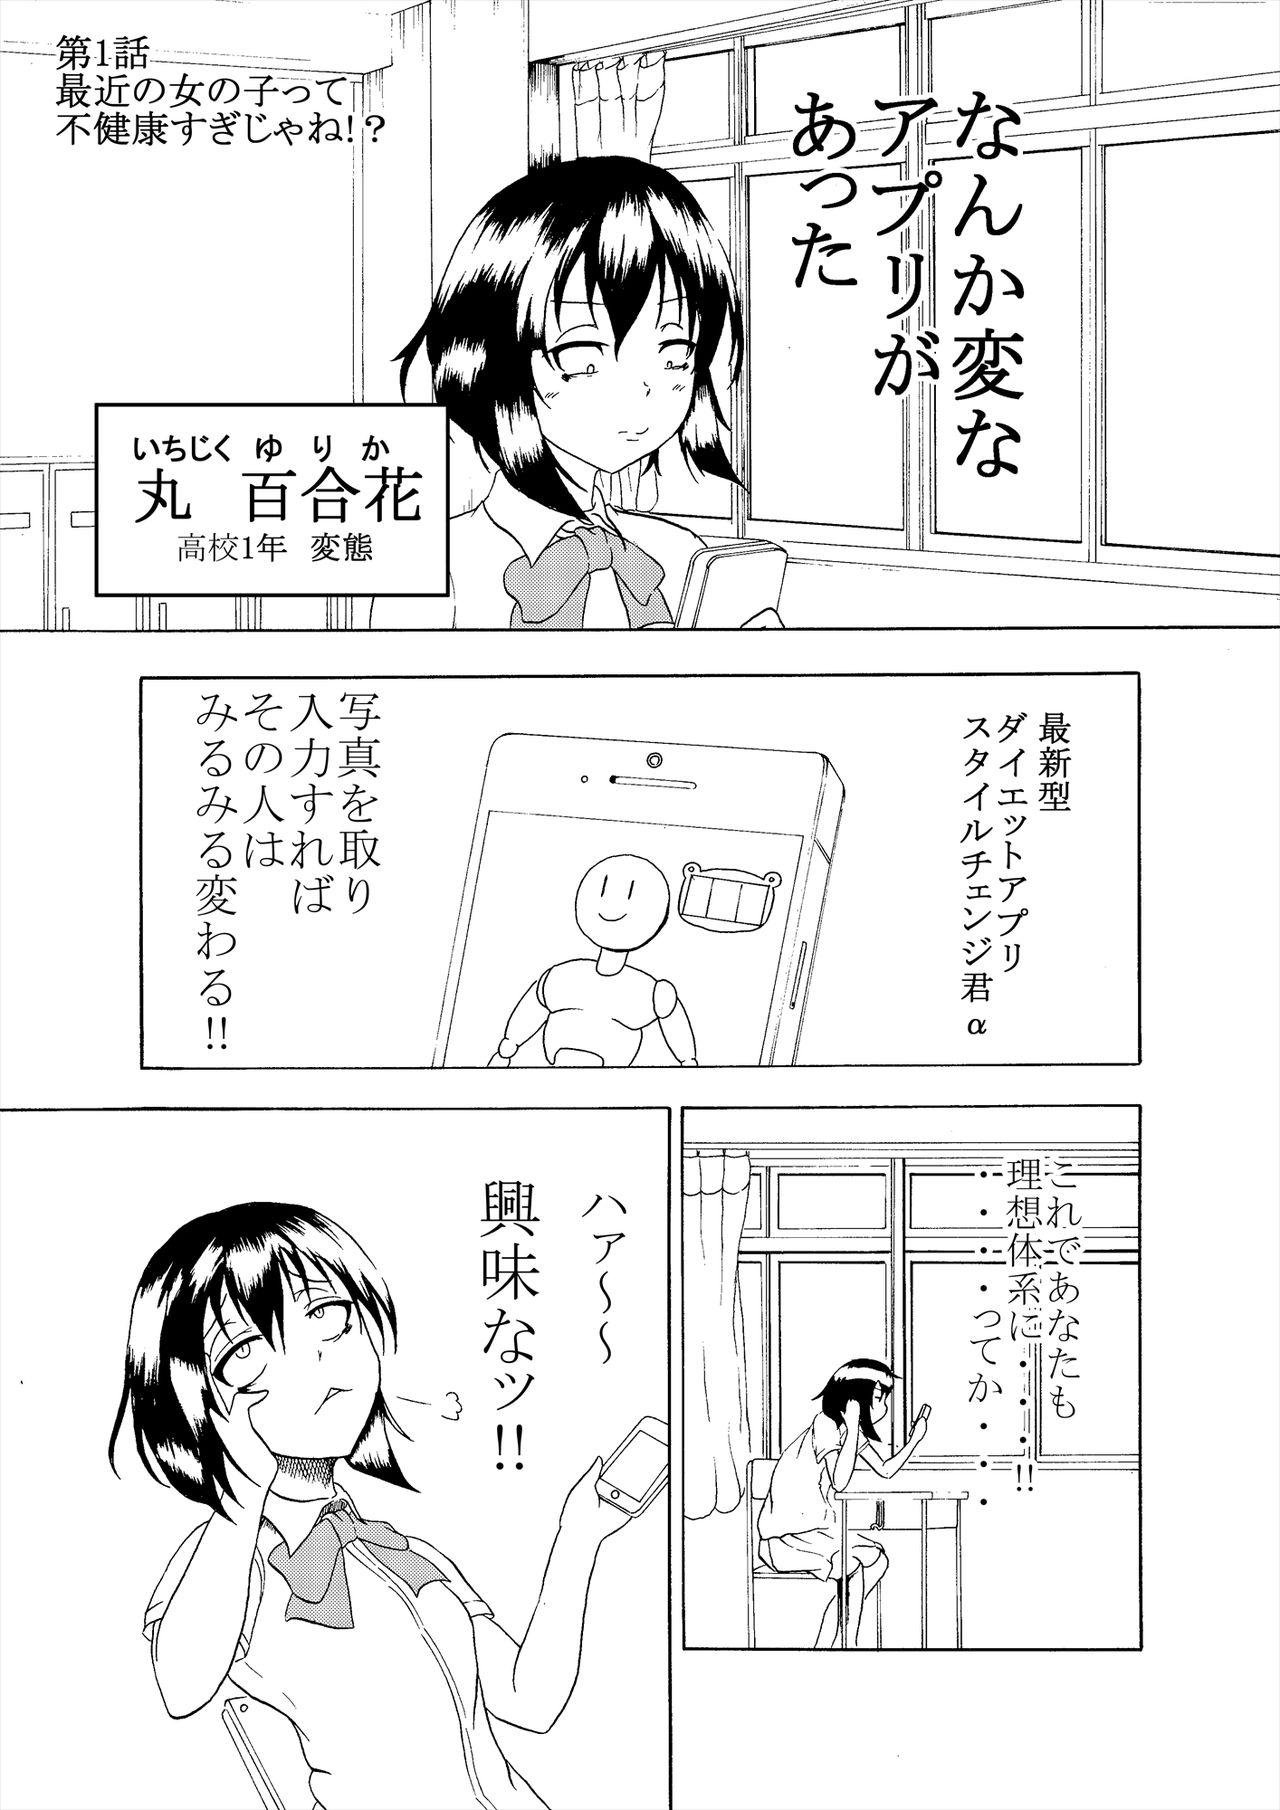 Oiled Comics Collection of Kukuru - Touhou project Kantai collection Haydee Hoe - Page 4